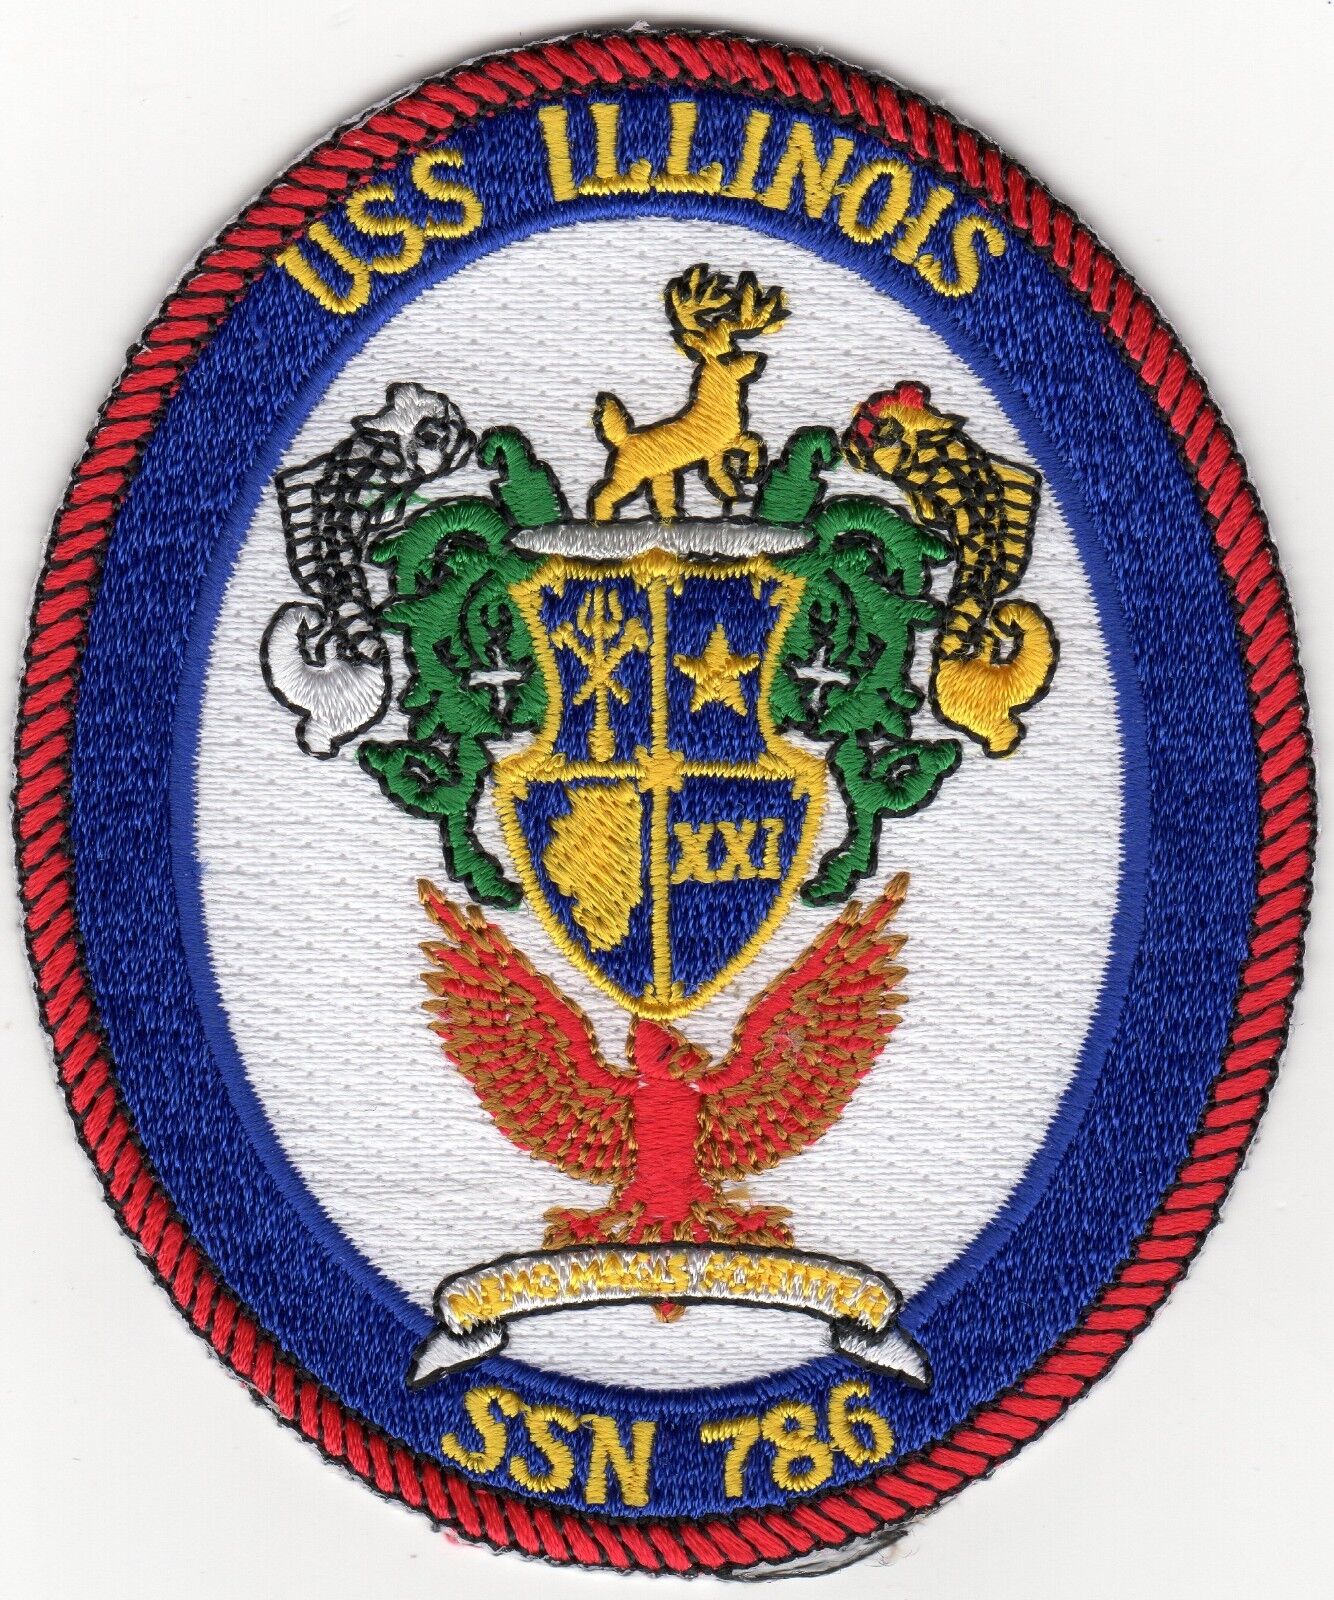 USS Illinois SSN 786 (smaller size) - BC Patch - USN Submarine - Cat No. C7254 